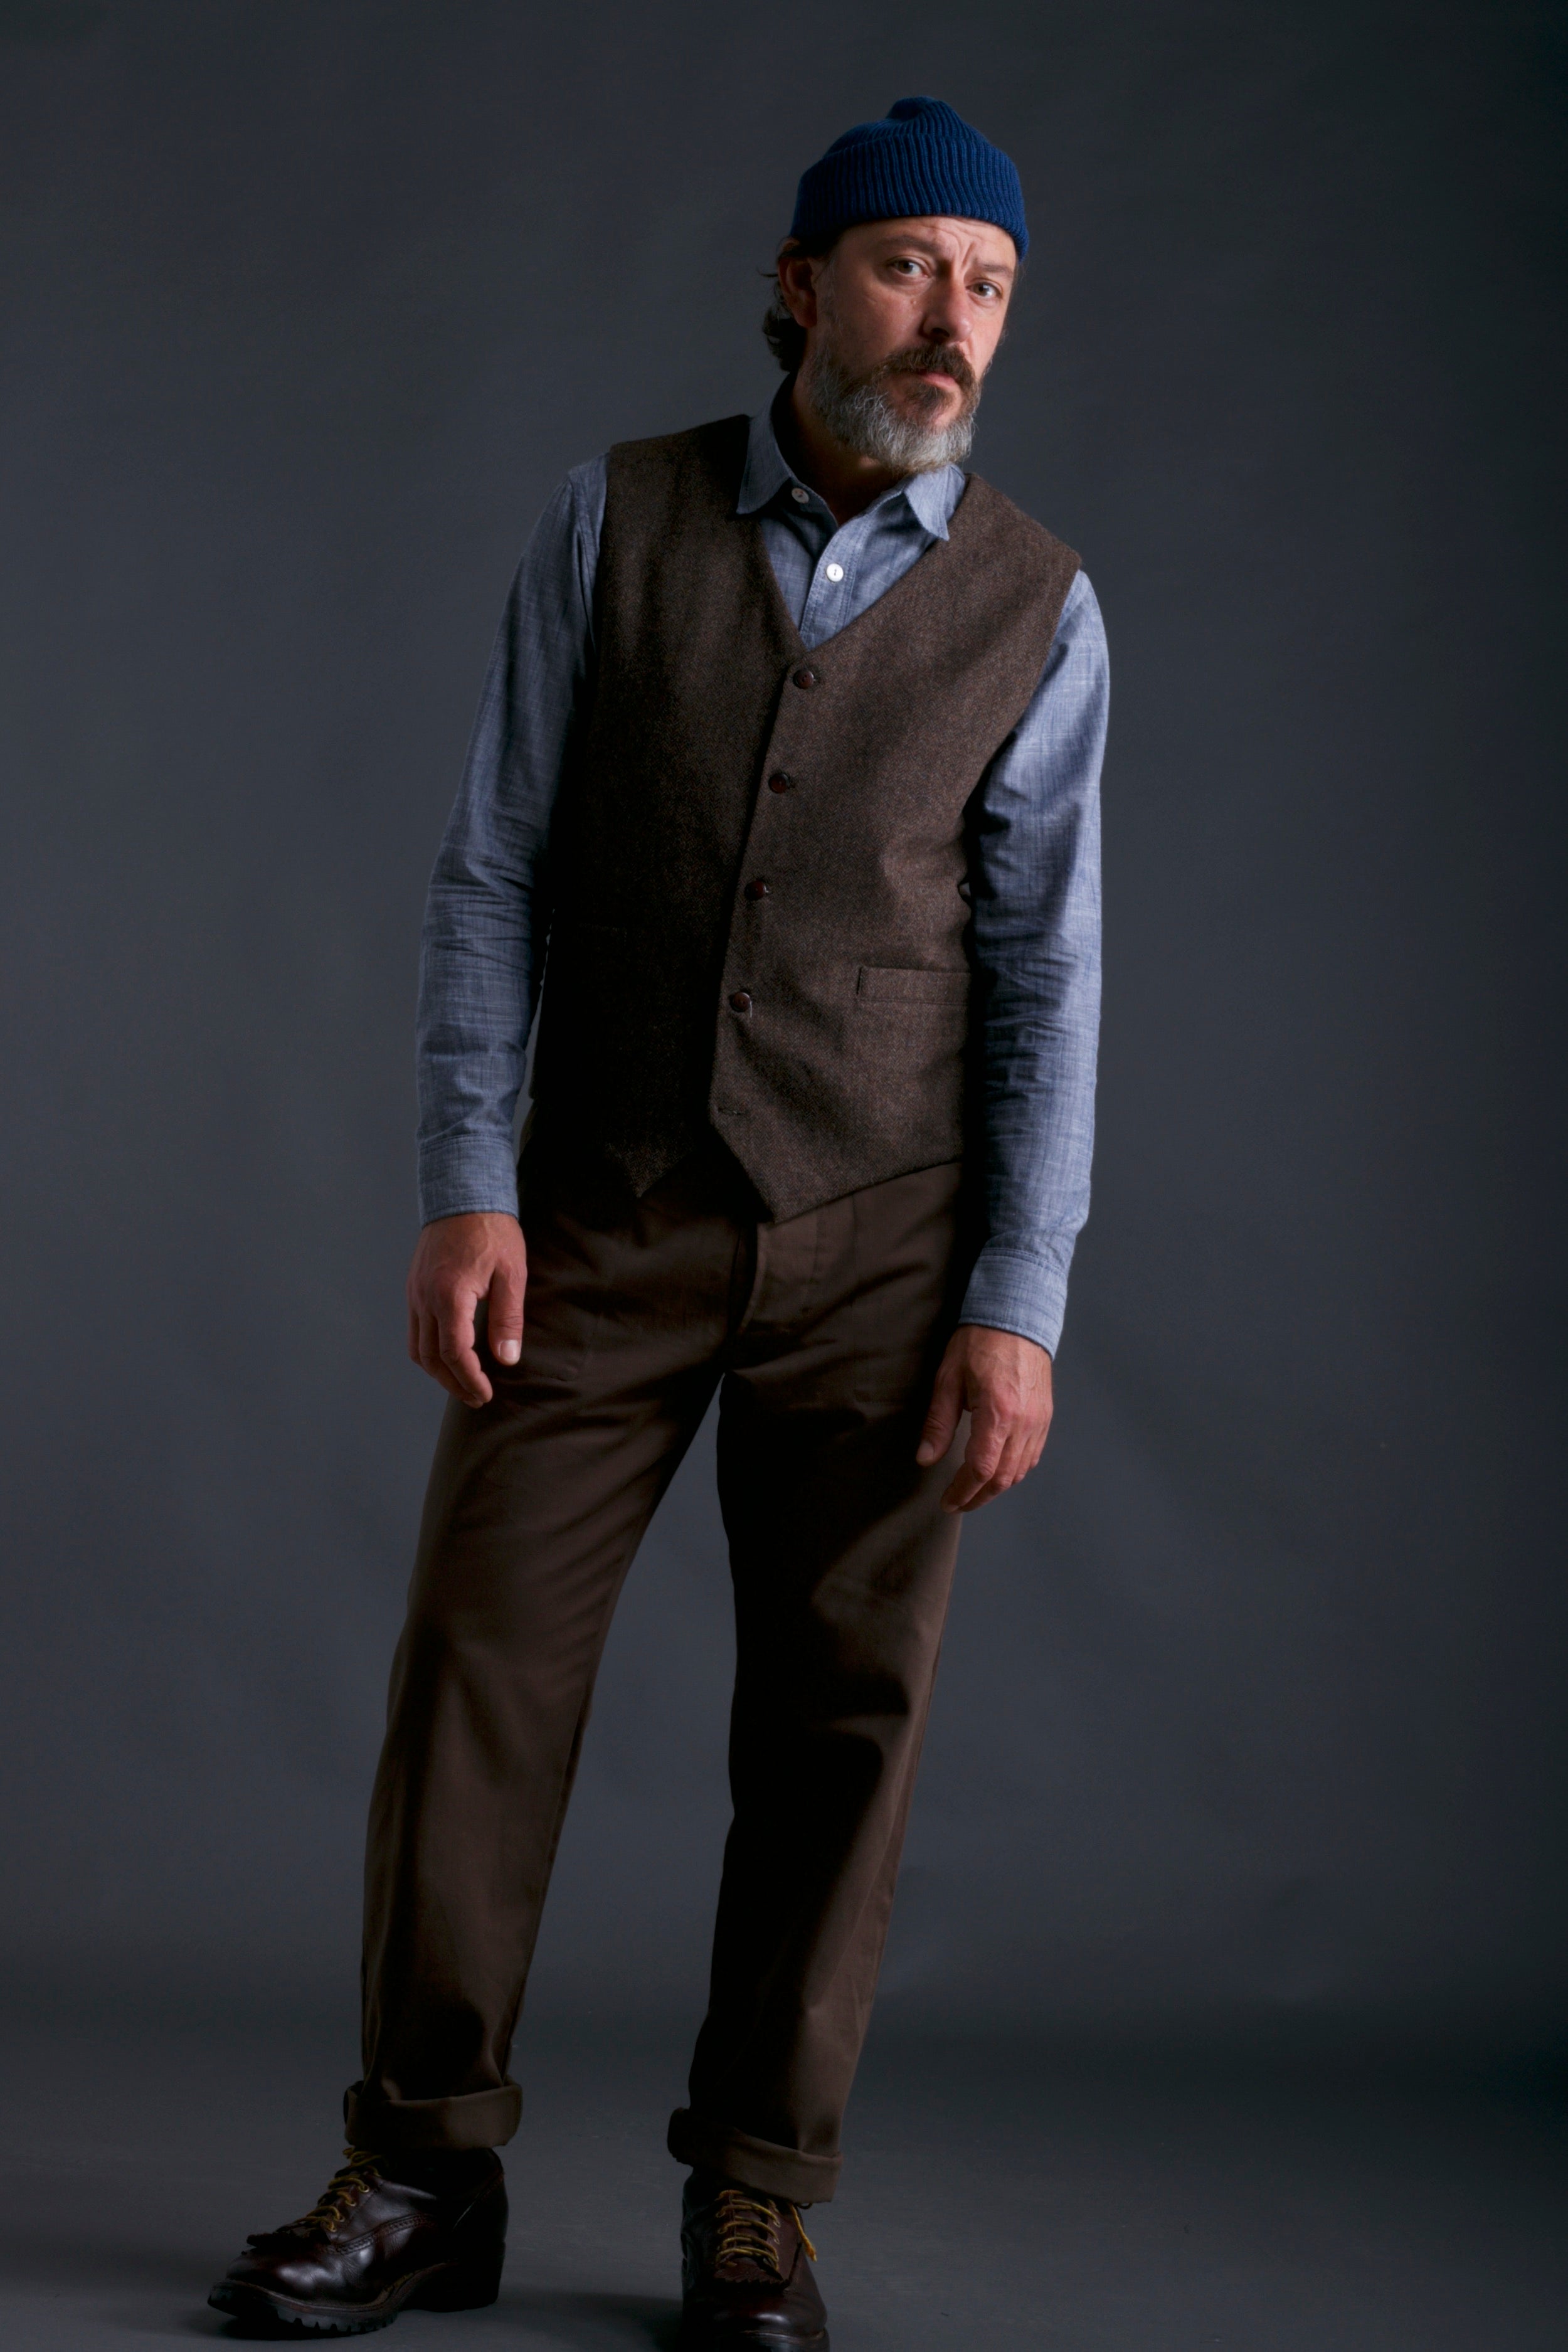 Man wears Carrier Company Men's Wool Waistcoat in Ginger/Brown Herringbone with Chambray Shirt, Wool Hat in Petrol Blue and Olive Dungarees